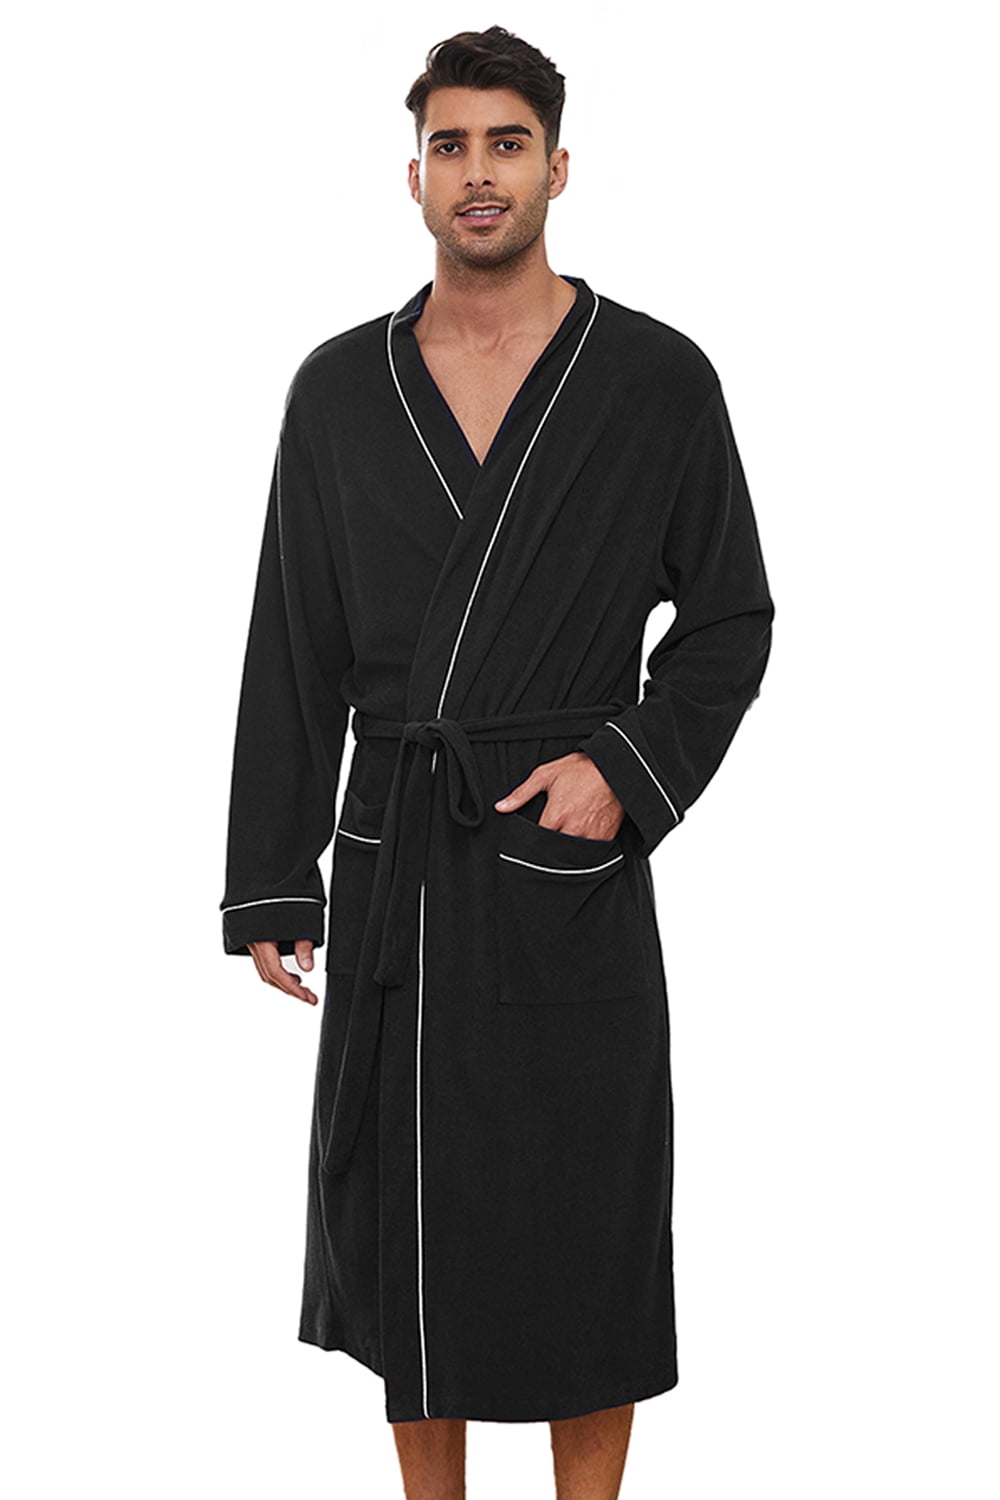 NY Threads Luxurious Mens Knit Robe Cotton Blend Bathrobe, Black, Large at   Men's Clothing store